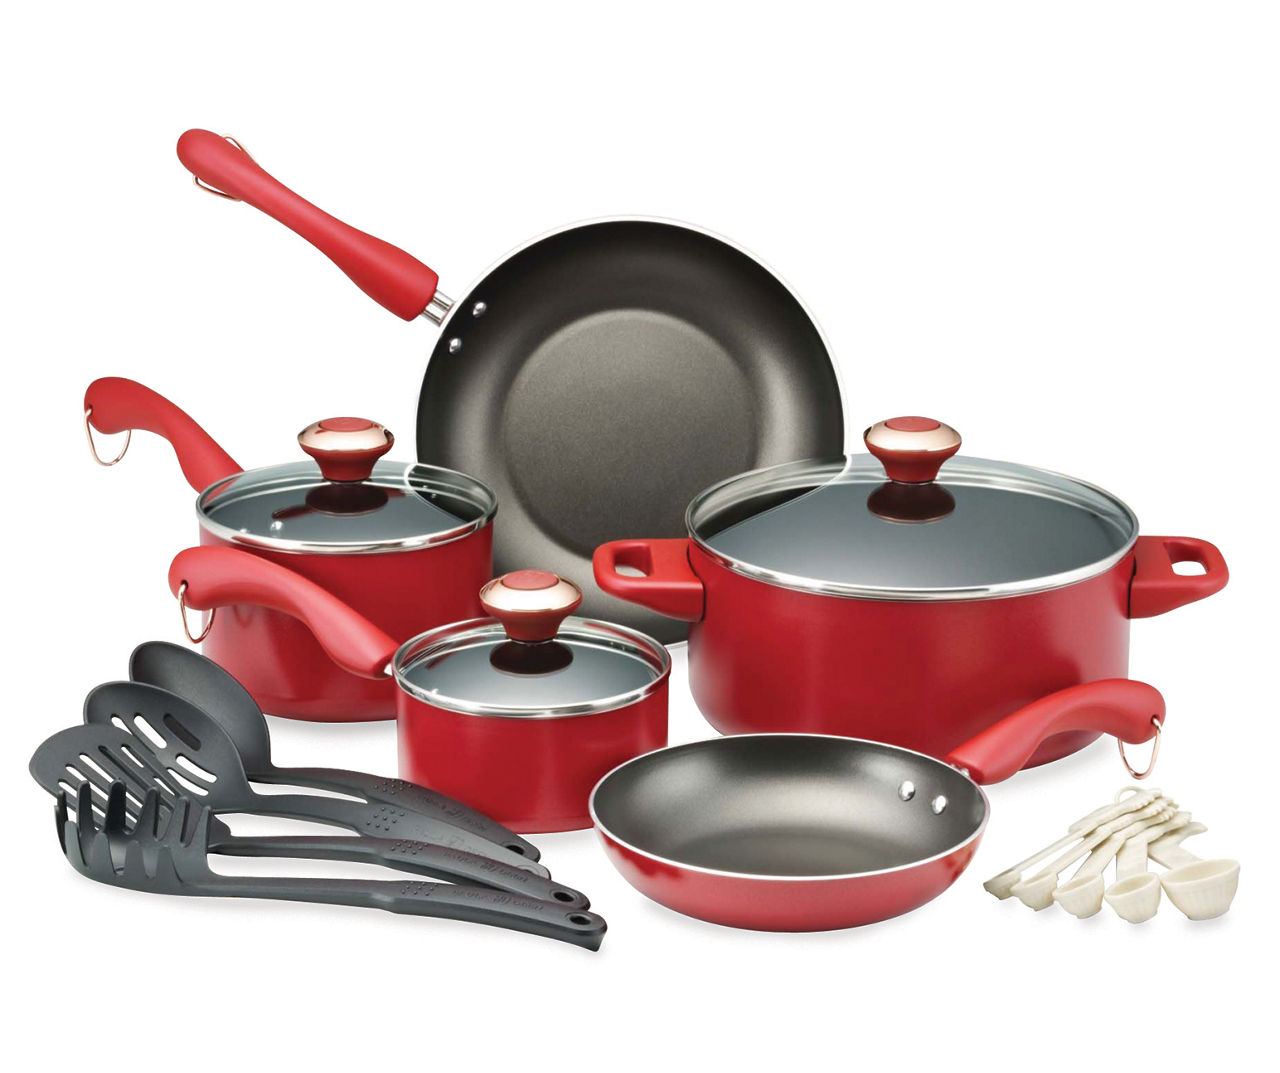  Paula Deen Family 14-Piece Ceramic, Non-Stick Cookware Set,  100% PFOA-Free and Induction Ready, Features Stay-Cool Handles, Dual Pour  Spouts and Kitchen Tools (Ruby Red): Home & Kitchen